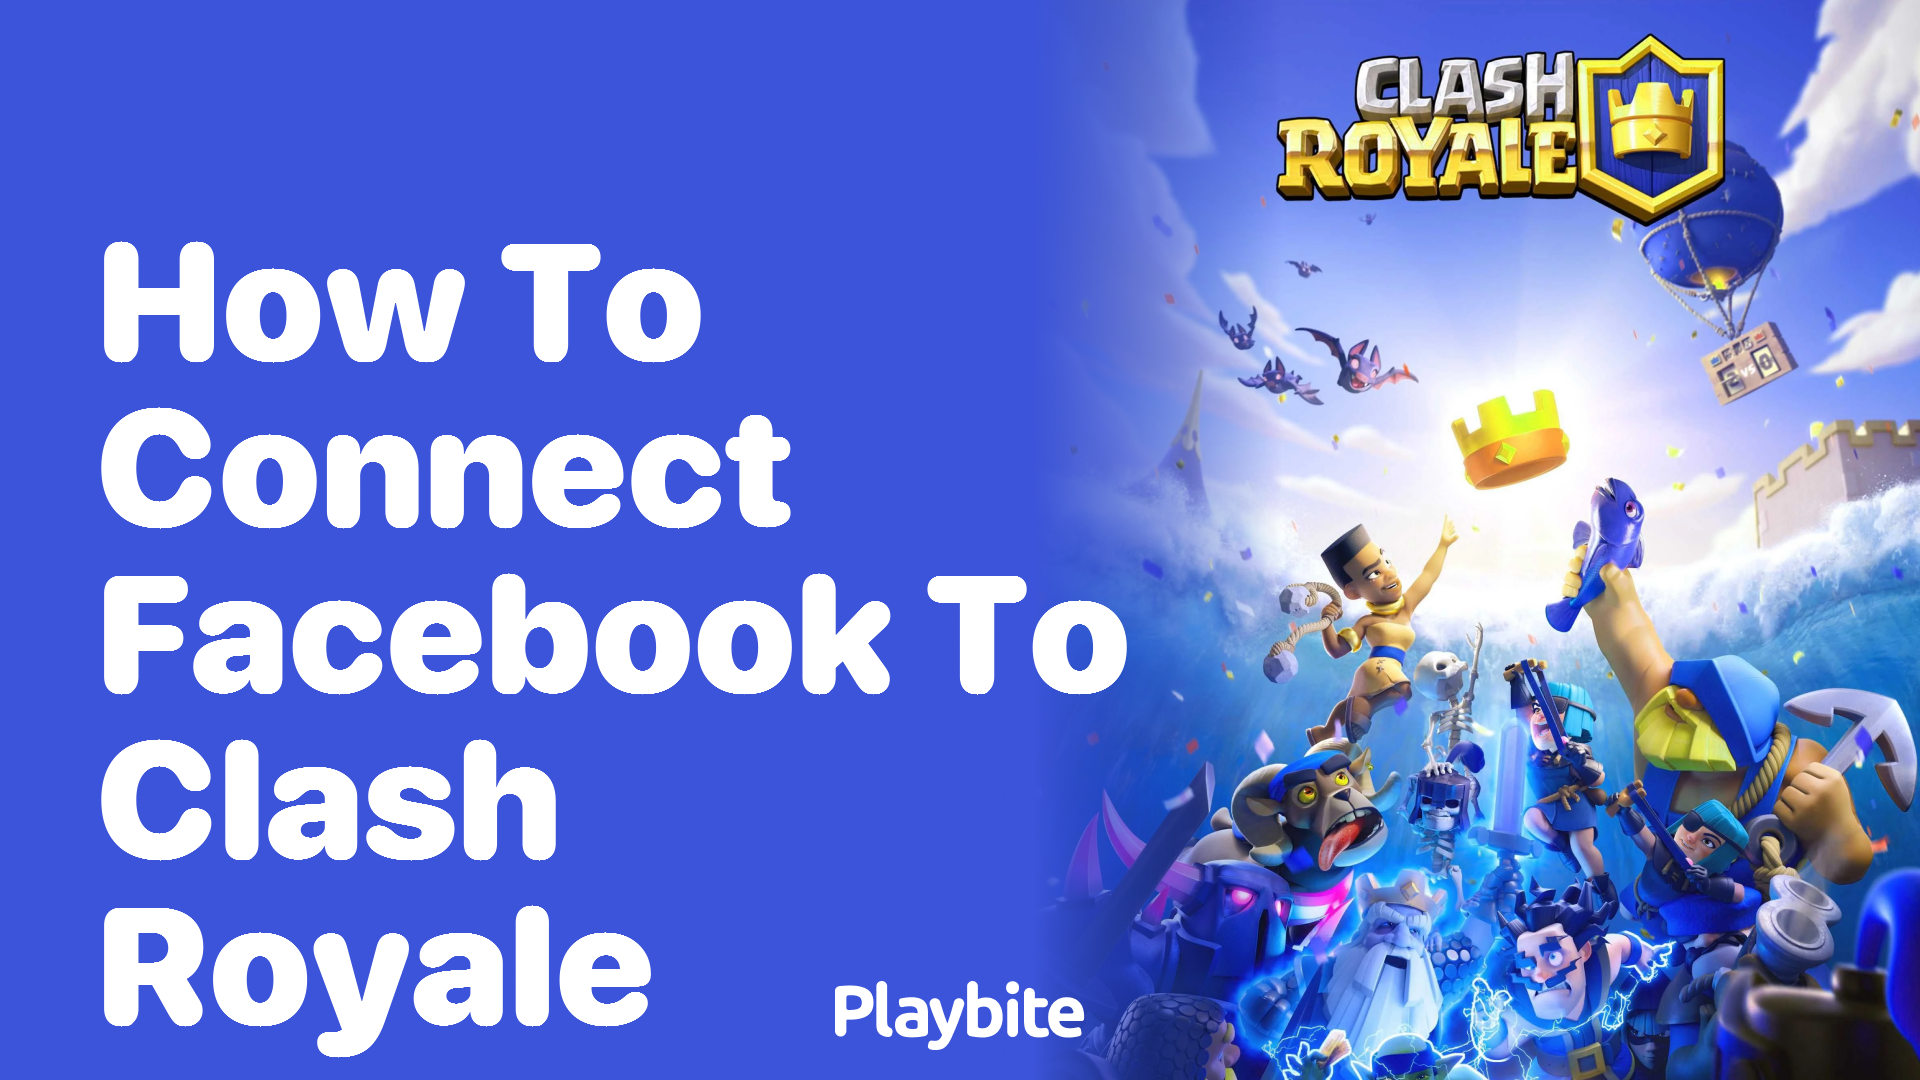 How to Connect Facebook to Clash Royale: A Simple Guide